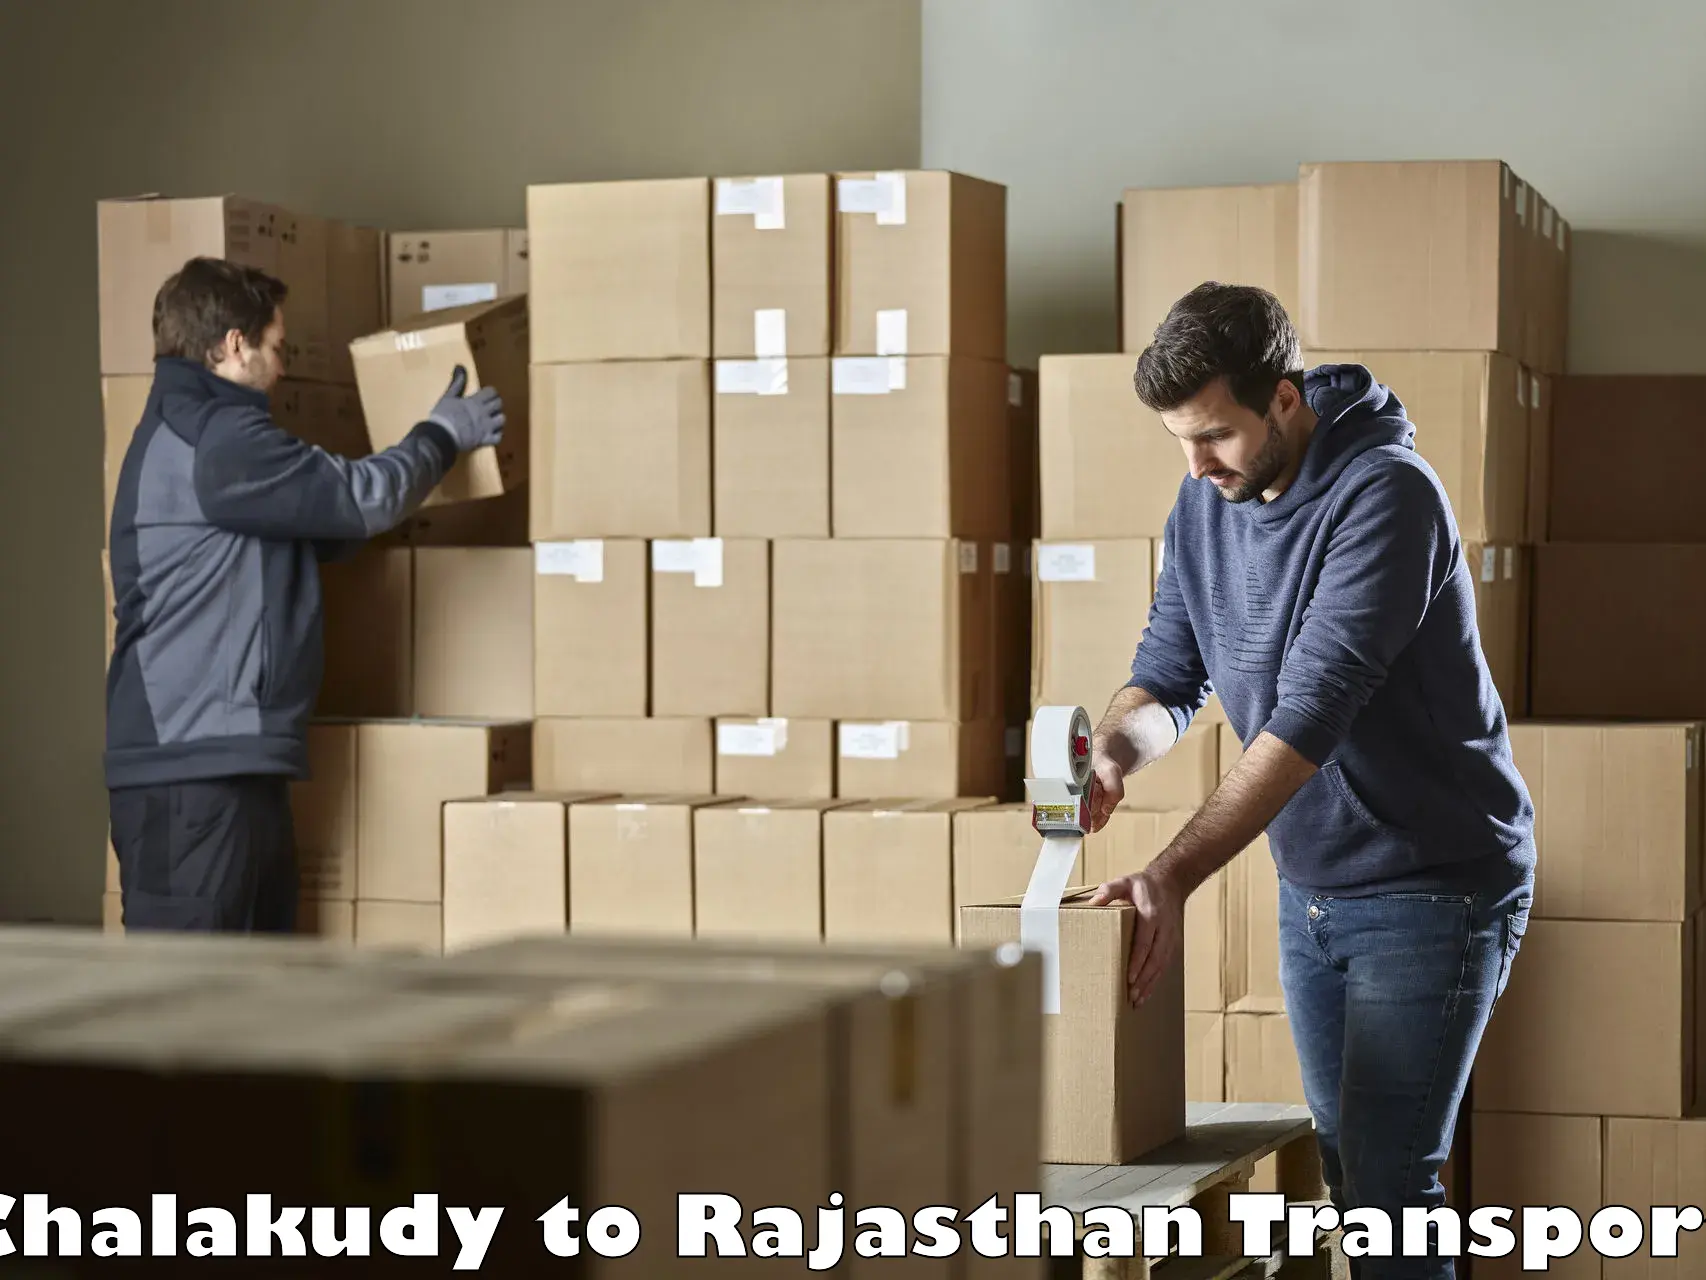 Road transport services in Chalakudy to Rajasthan